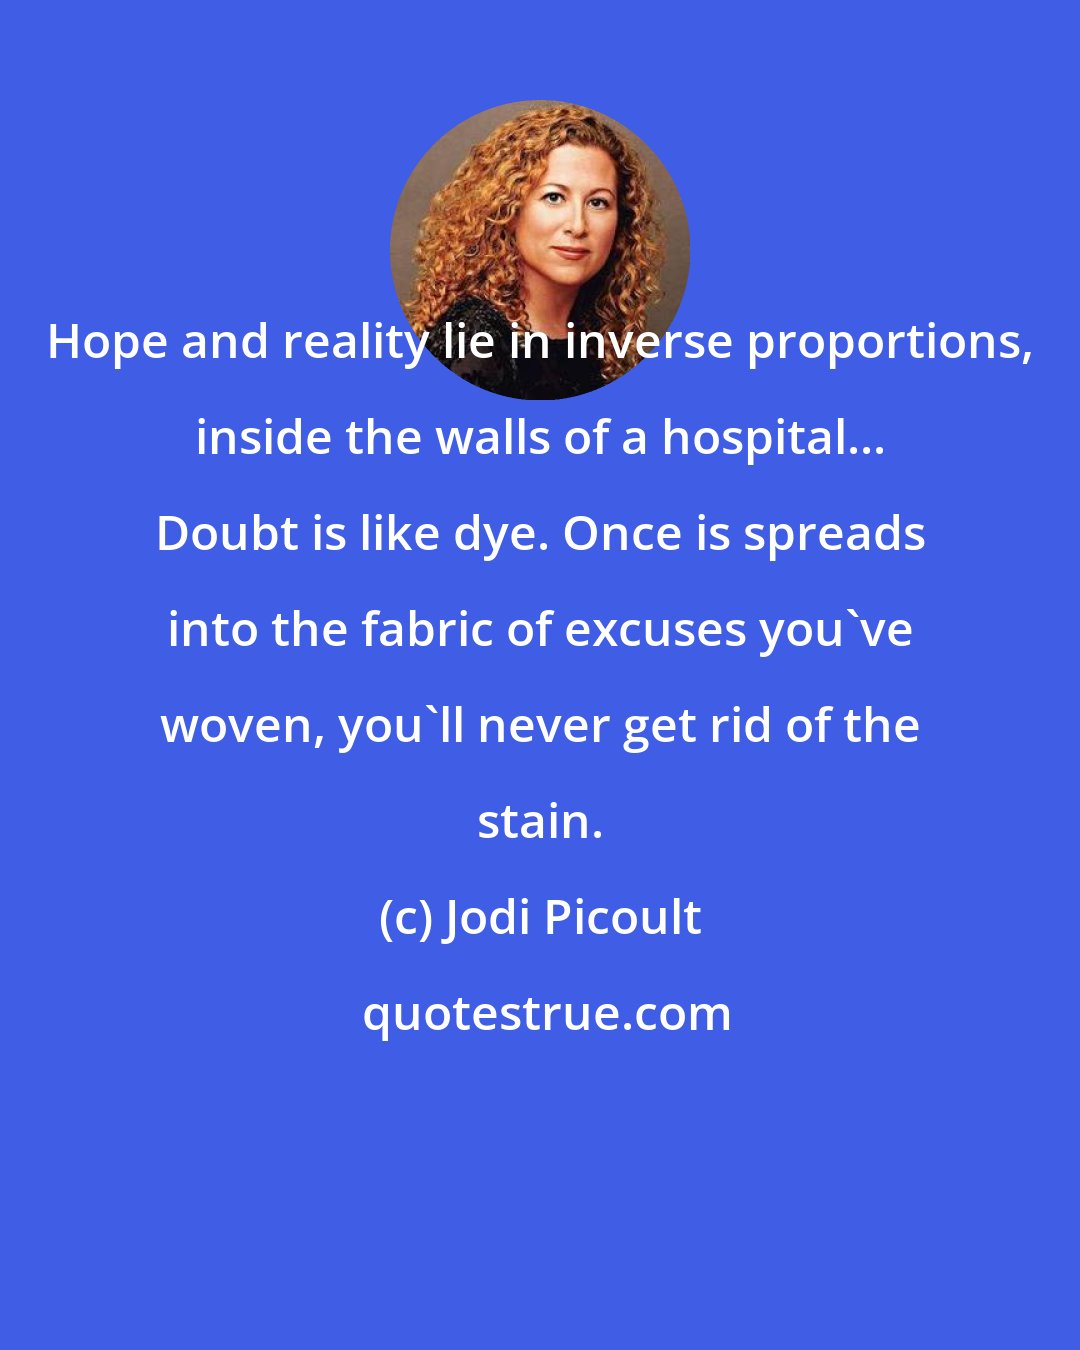 Jodi Picoult: Hope and reality lie in inverse proportions, inside the walls of a hospital... Doubt is like dye. Once is spreads into the fabric of excuses you've woven, you'll never get rid of the stain.